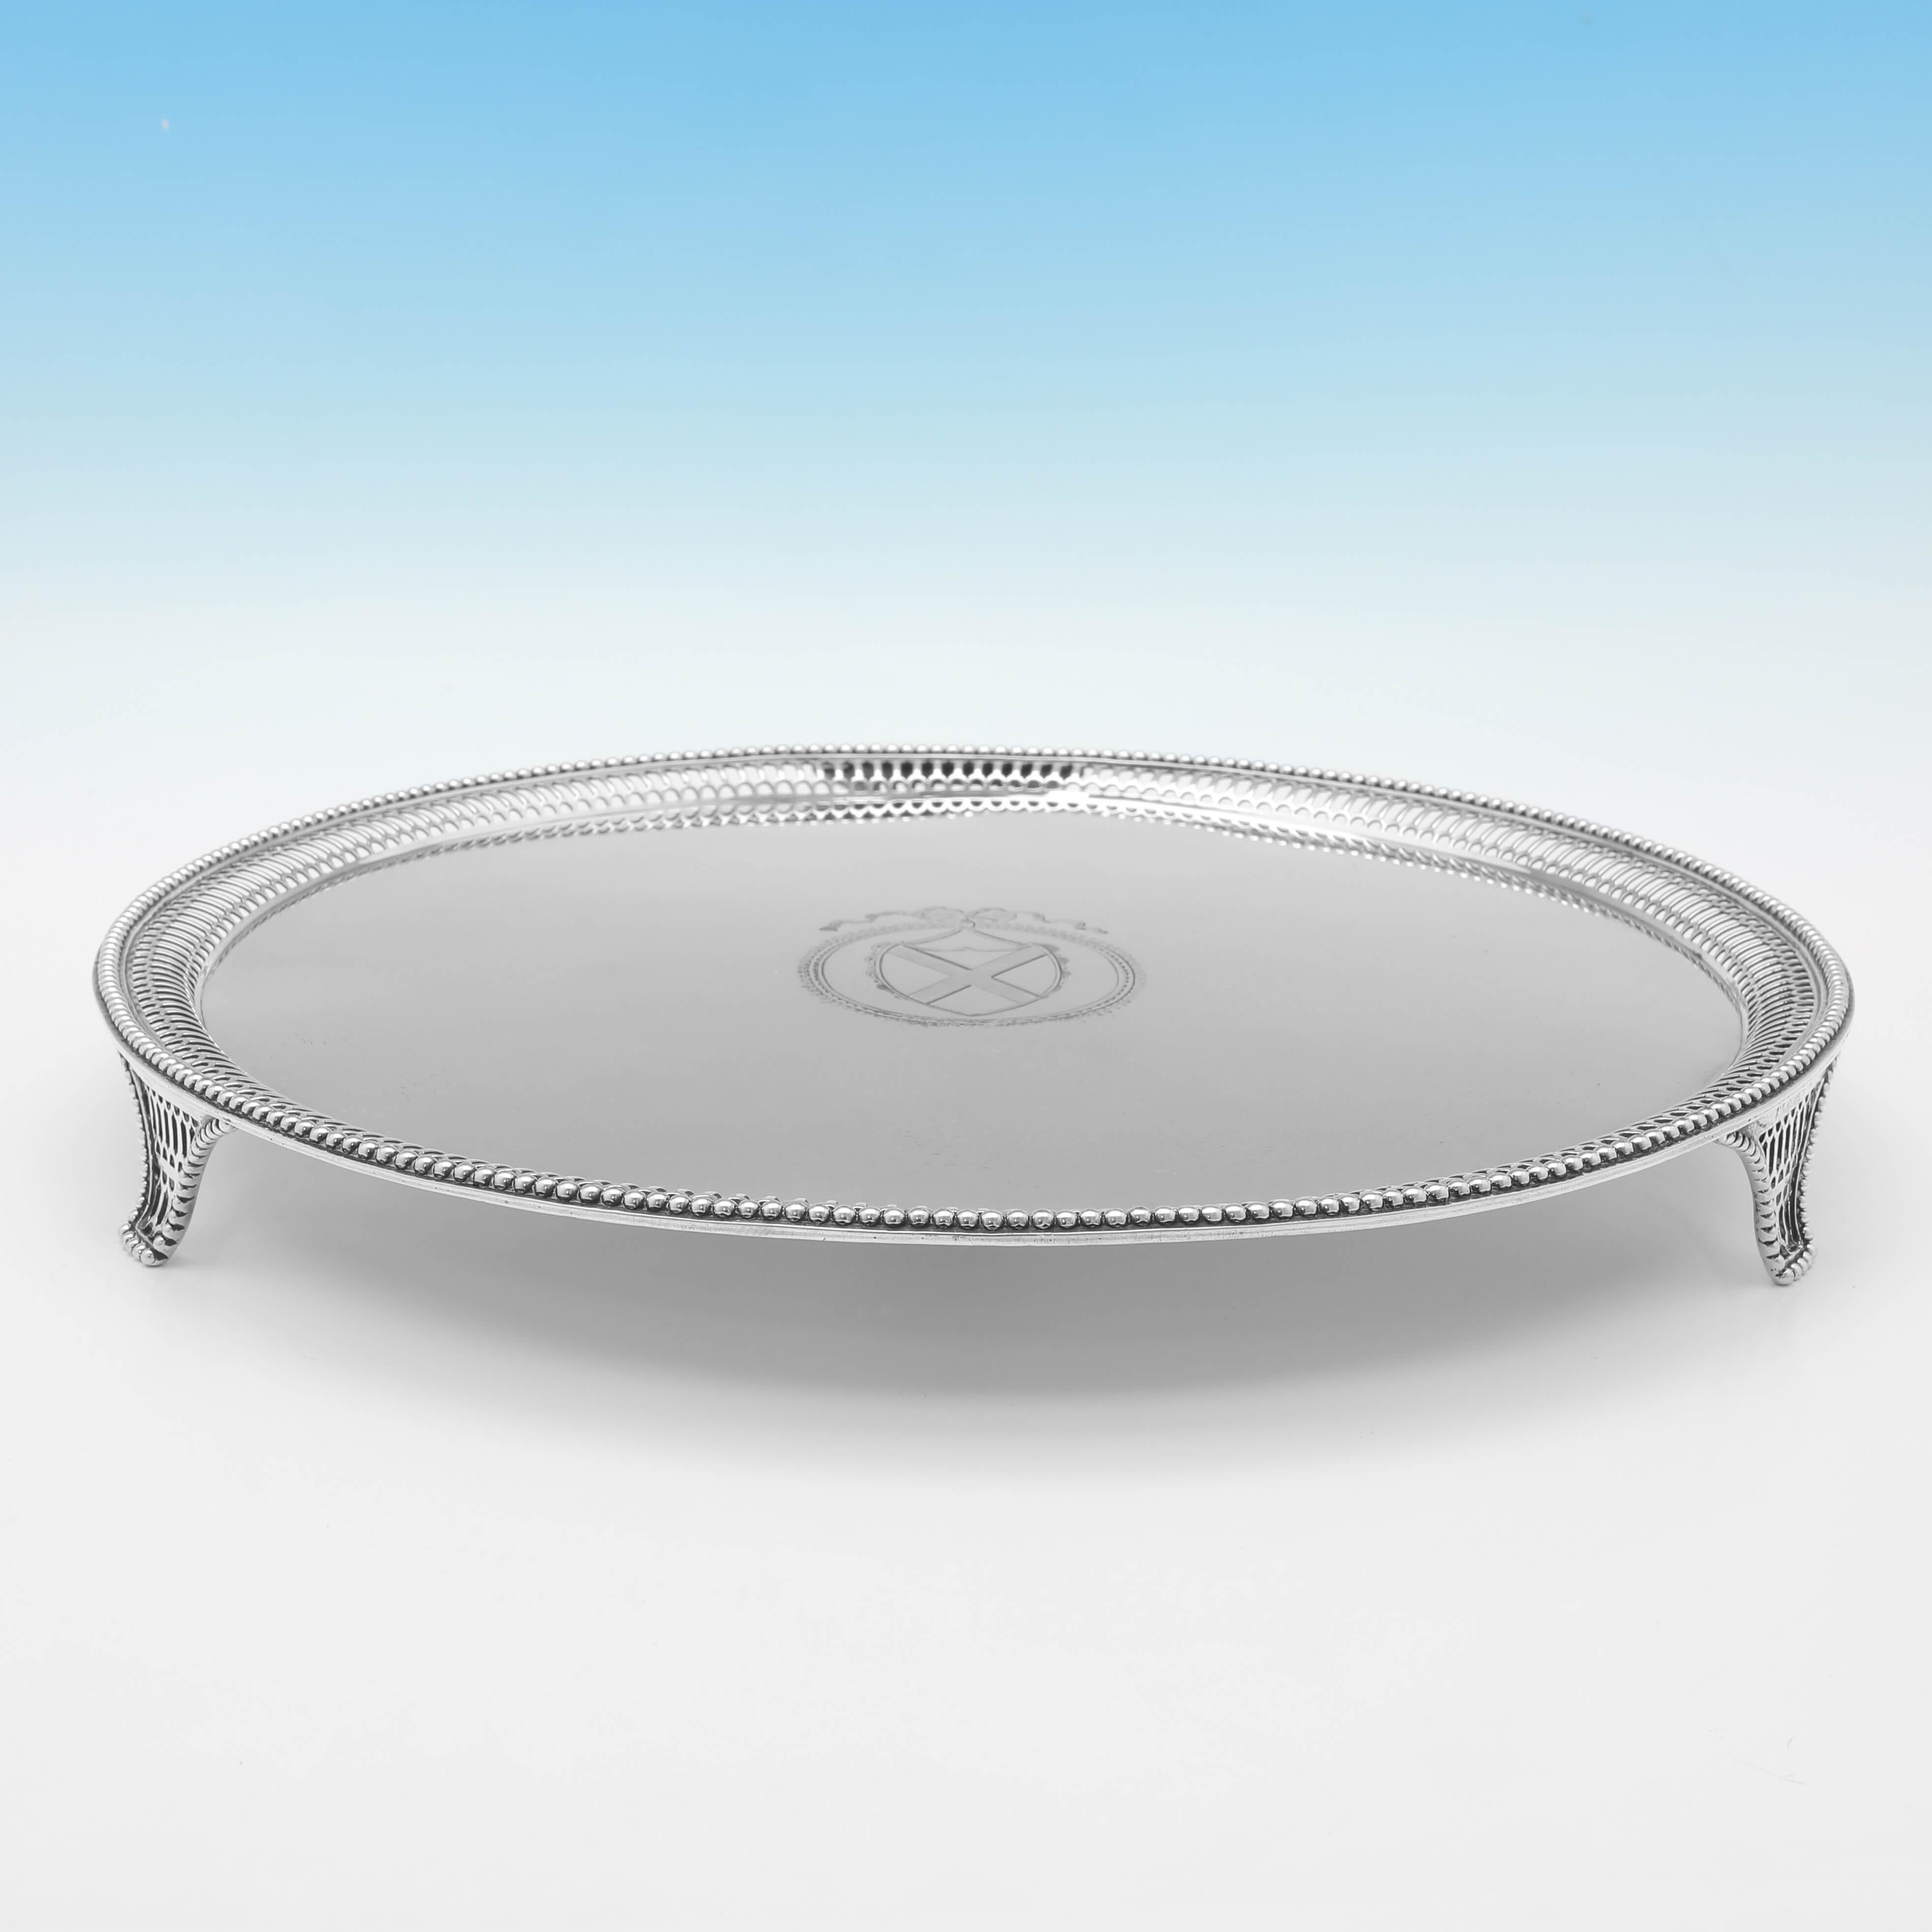 Hallmarked in London in 1774 by John Carter II, this handsome, George III Period, antique sterling silver salver, stands on 3 feet, and features a pierced rim and bead border, and an engraved shield to the centre. 

The salver measures 1.5